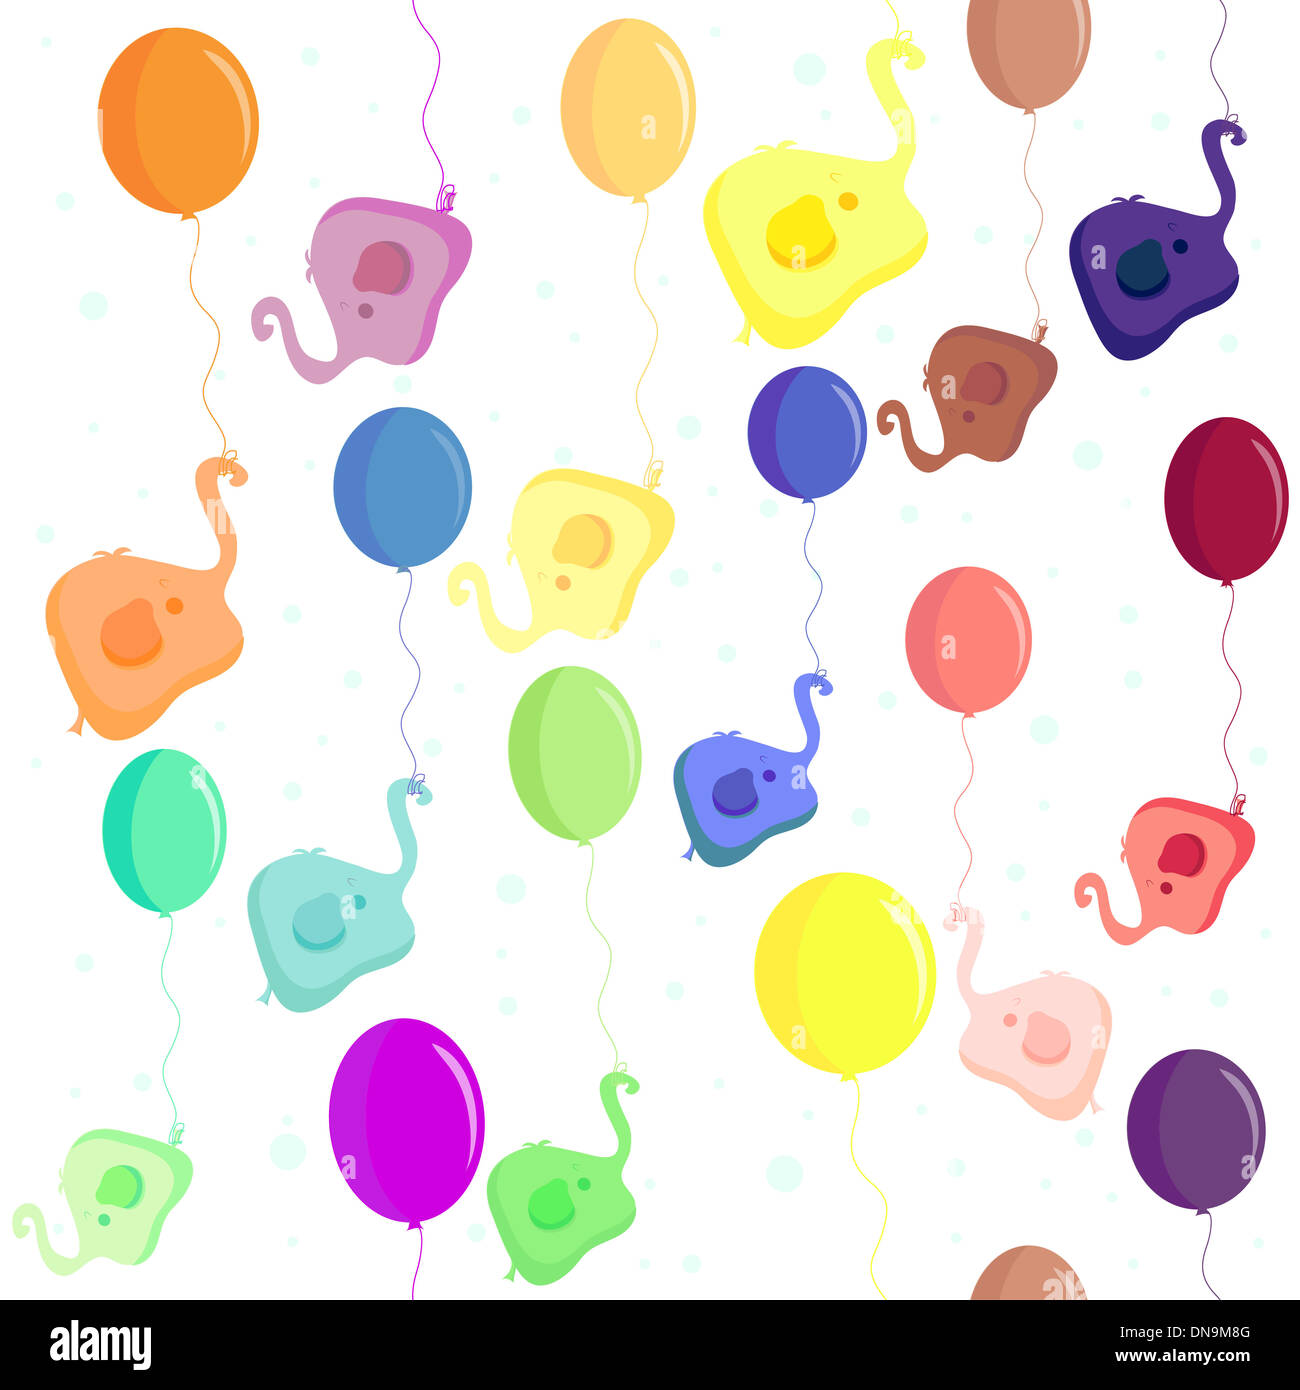 elephant flying in a balloon. vector. seamless texture. Stock Photo